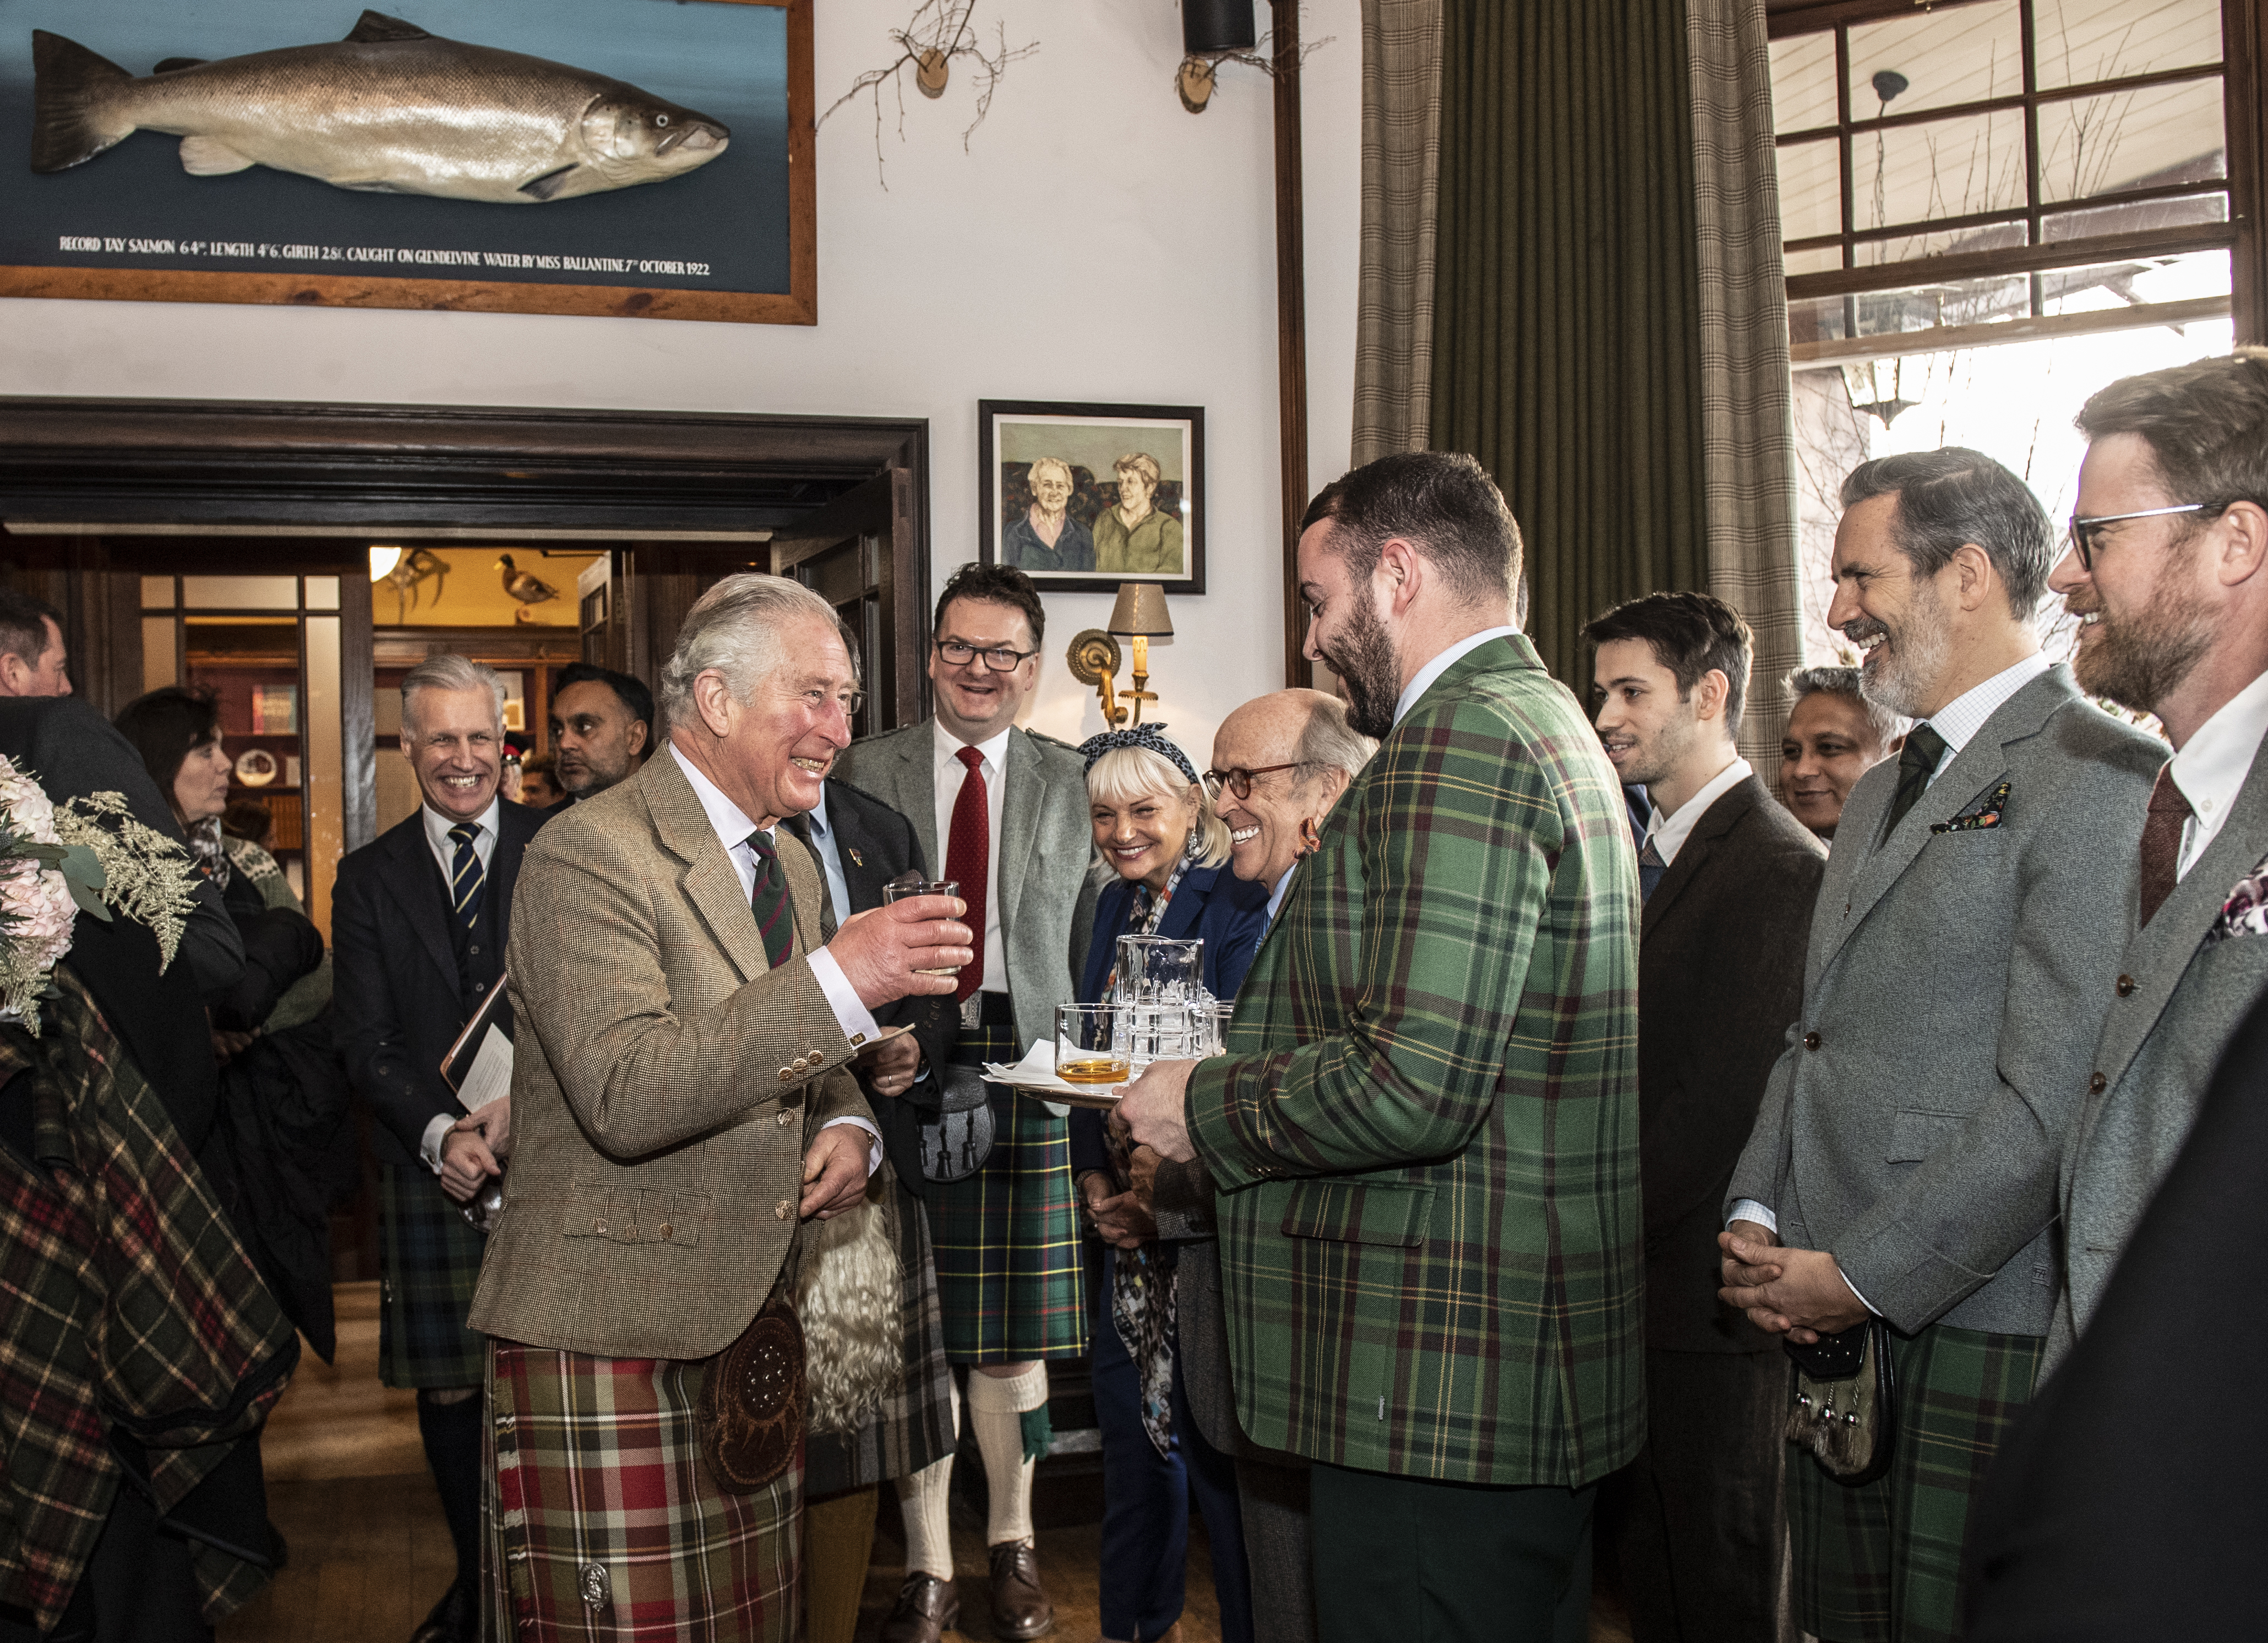 The Duke and Duchess of Rothesay visited the newly-restored Fife Arms.